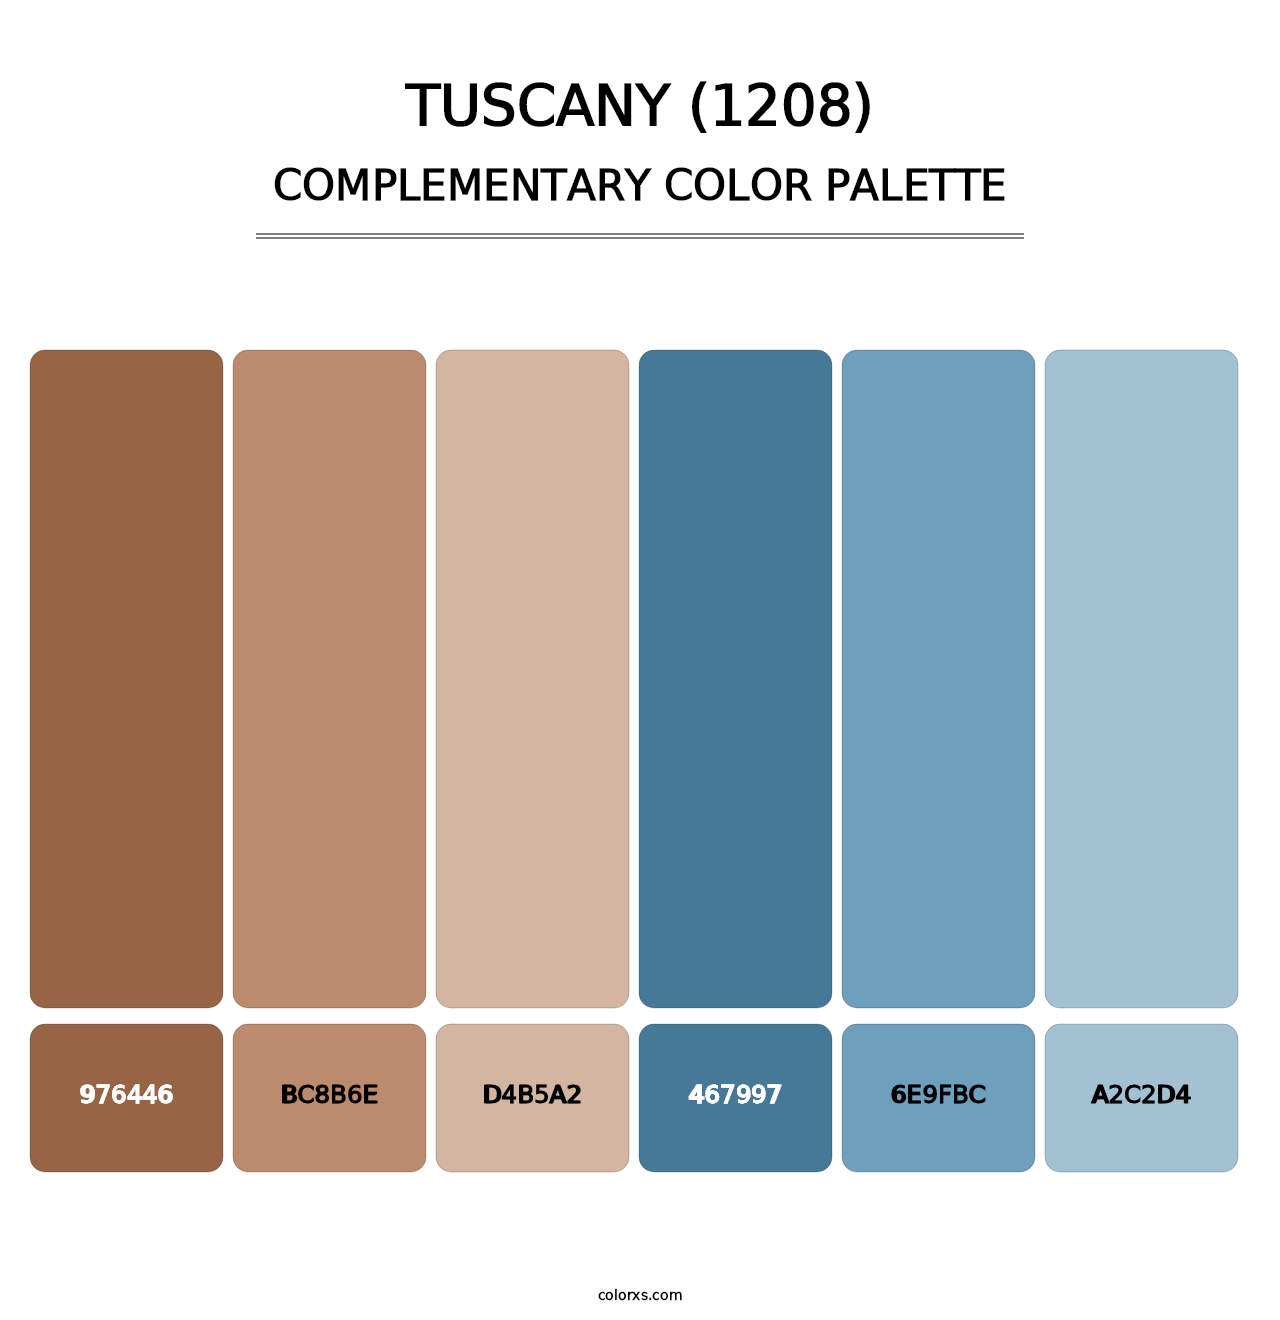 Tuscany (1208) - Complementary Color Palette